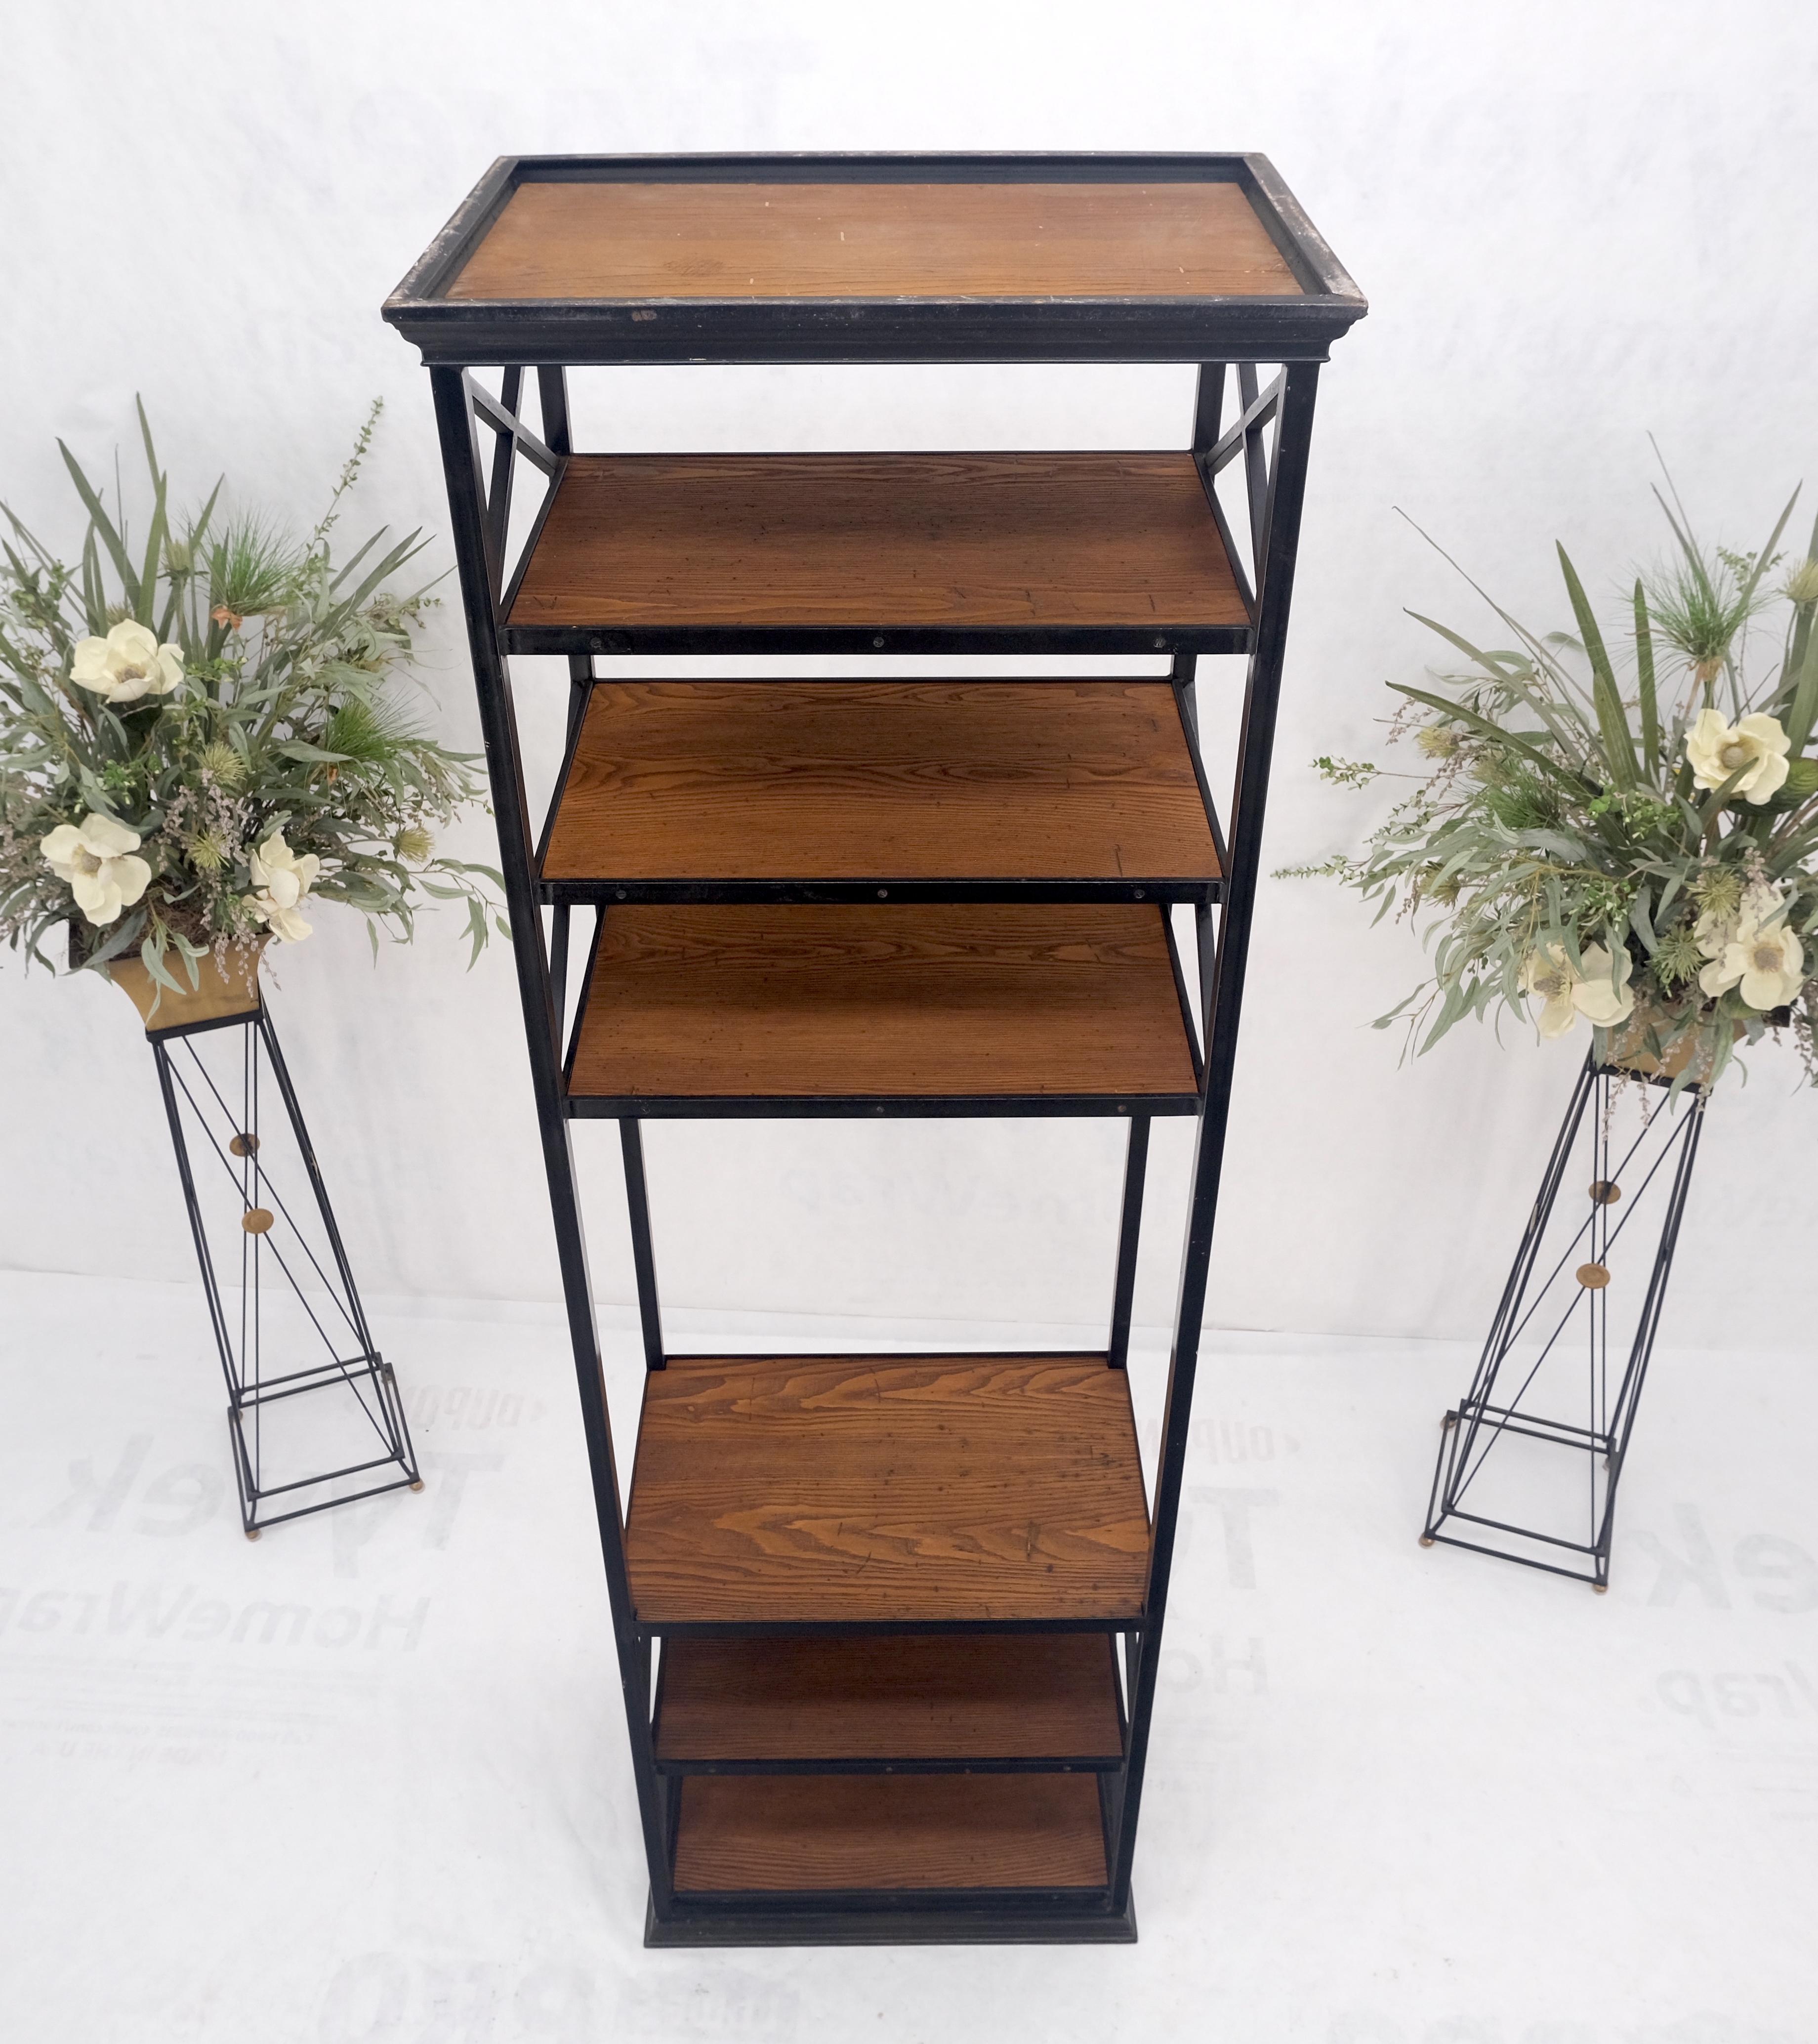 Mid-Century Modern Black Steel & Wormy Chestnut Shelves 8 Foot Tall Etagere BookCase Display MINT For Sale